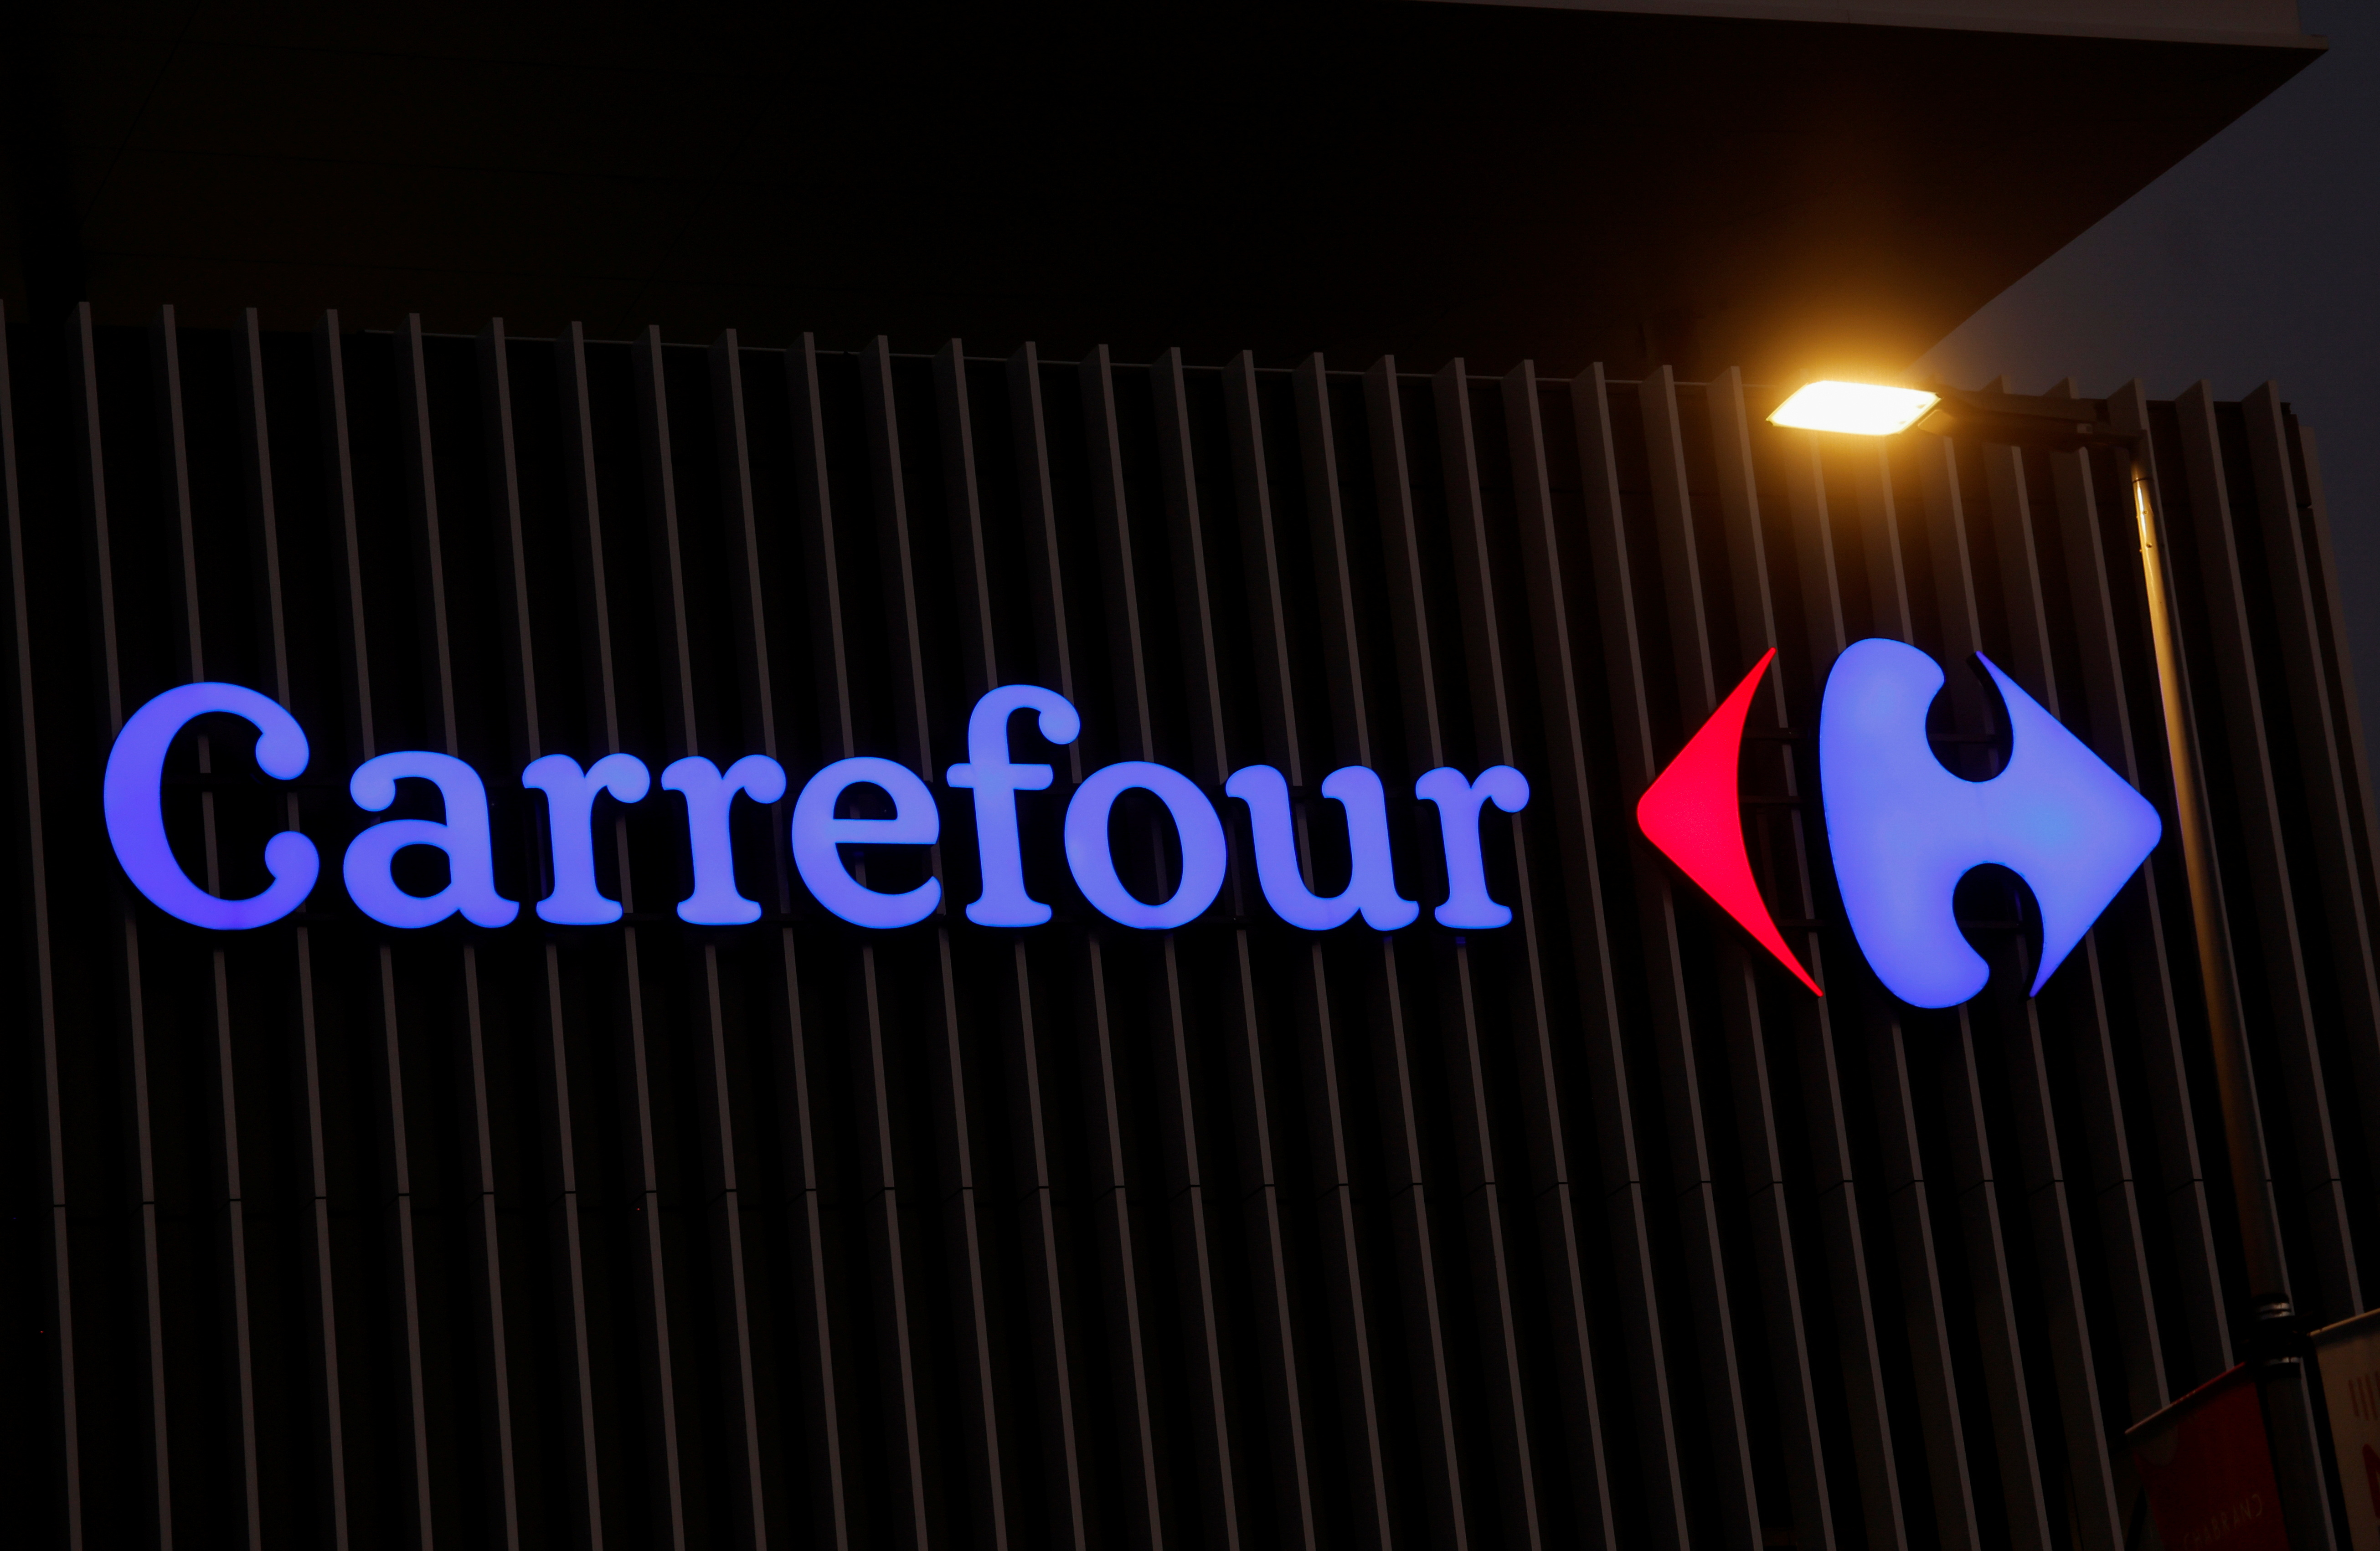 The logo of Carrefour is seen at a Carrefour Hypermarket store in Nice